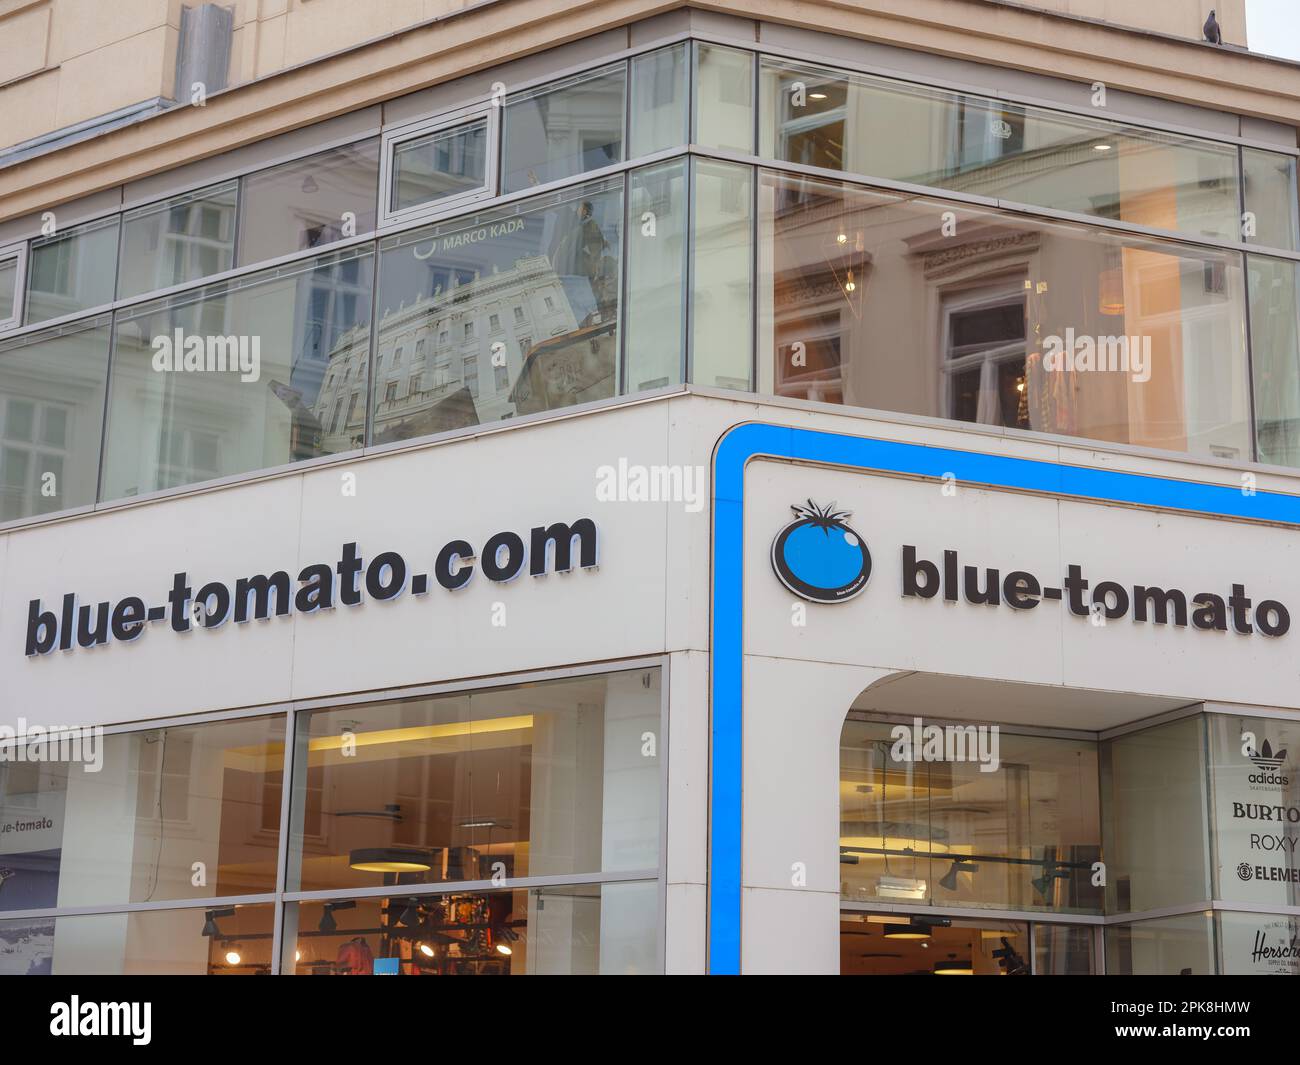 Vienna, Austria - August 8, 2022 Facades of Blue Tomato is online shop for snowboarding, freeskiing, surfing, skating, and streetstyle